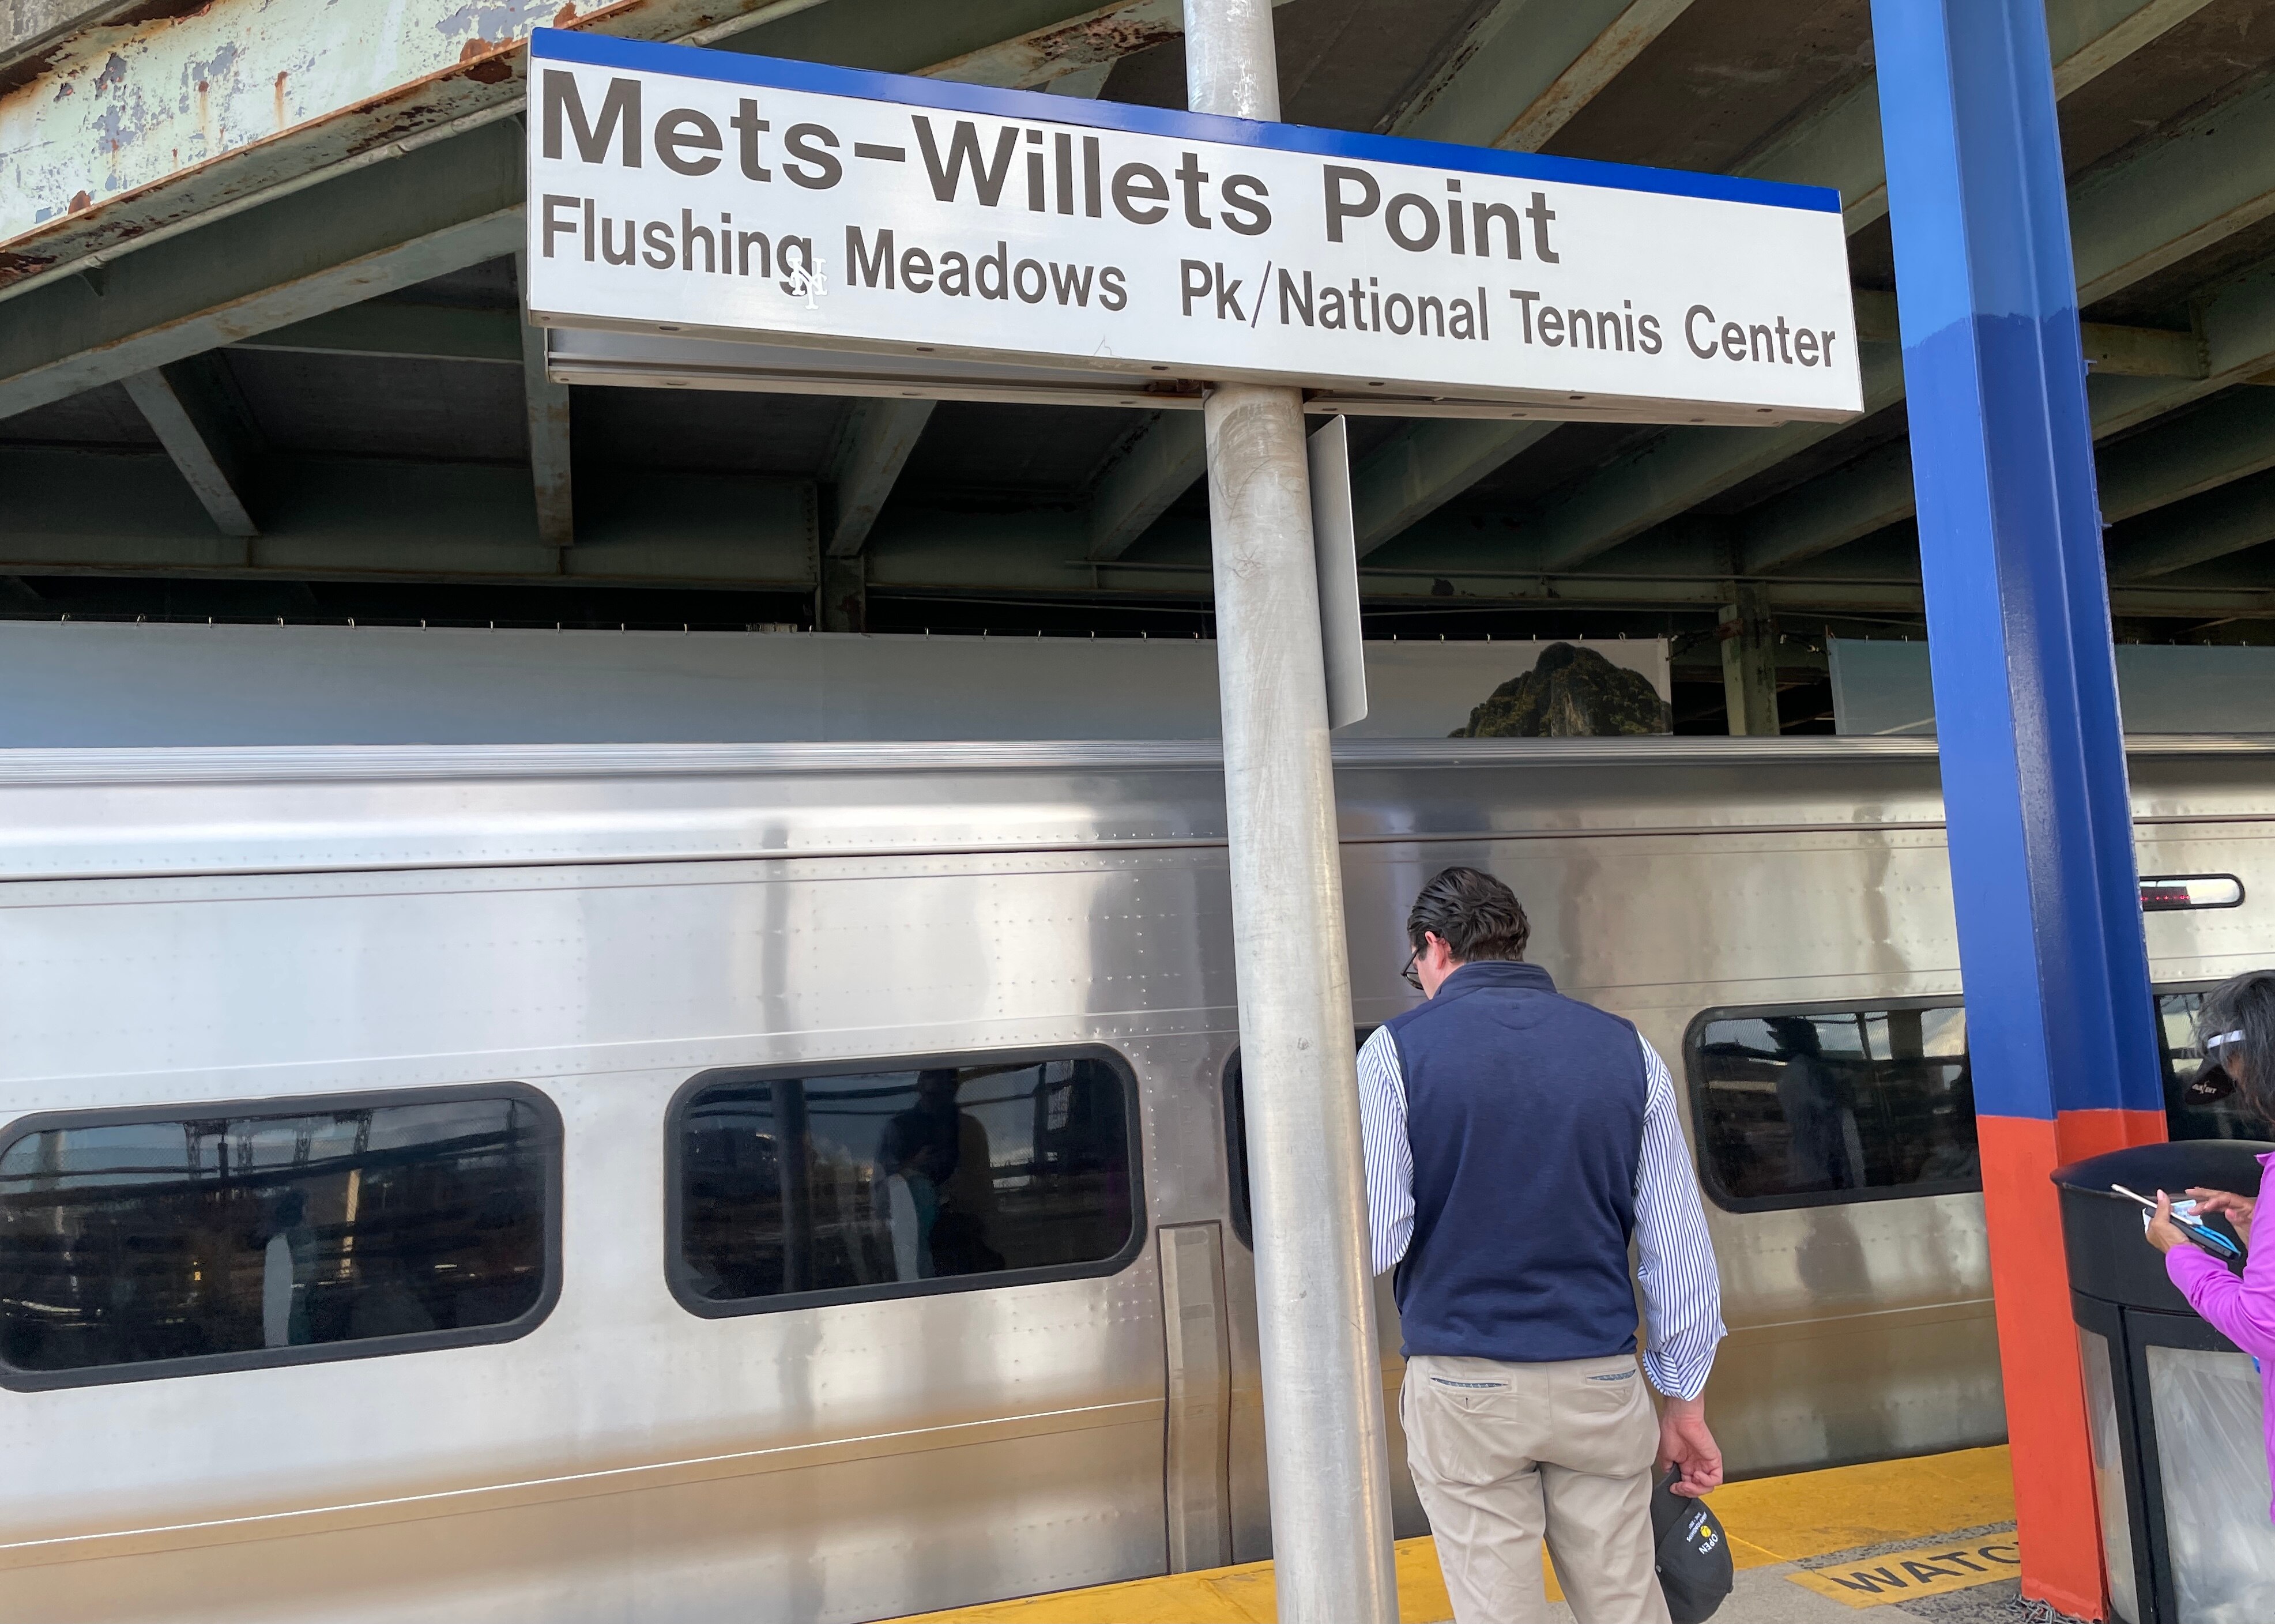 Yankees and Mets Fans Agree on One Thing – Mass Transit is the Best Way to the Subway Series